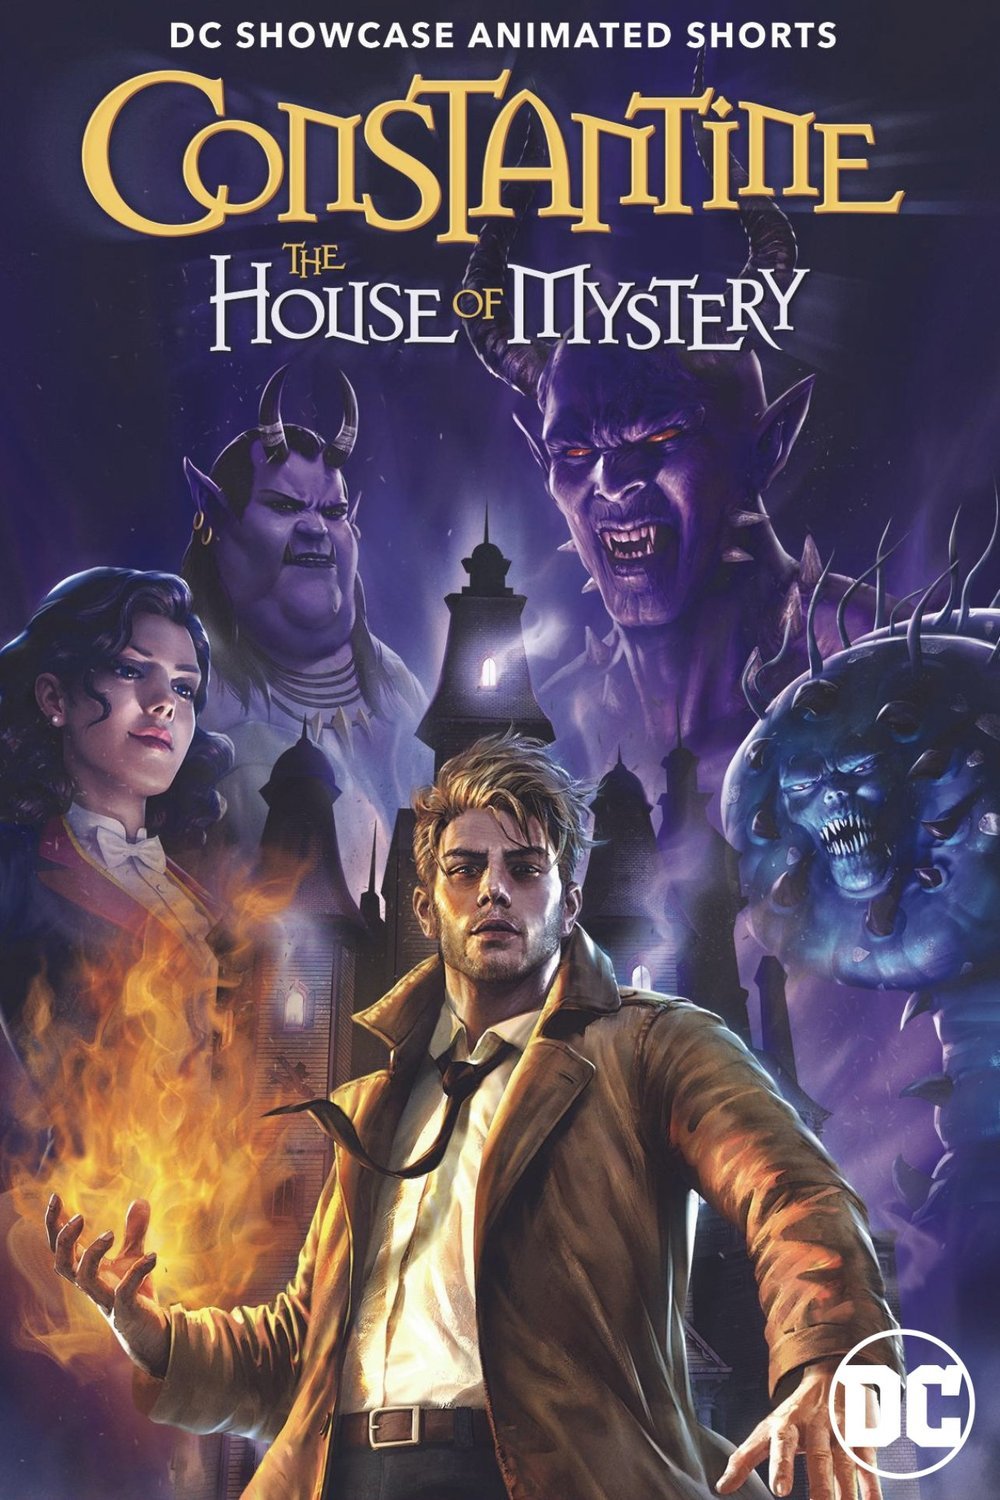 Poster of the movie DC Showcase: Constantine - The House of Mystery